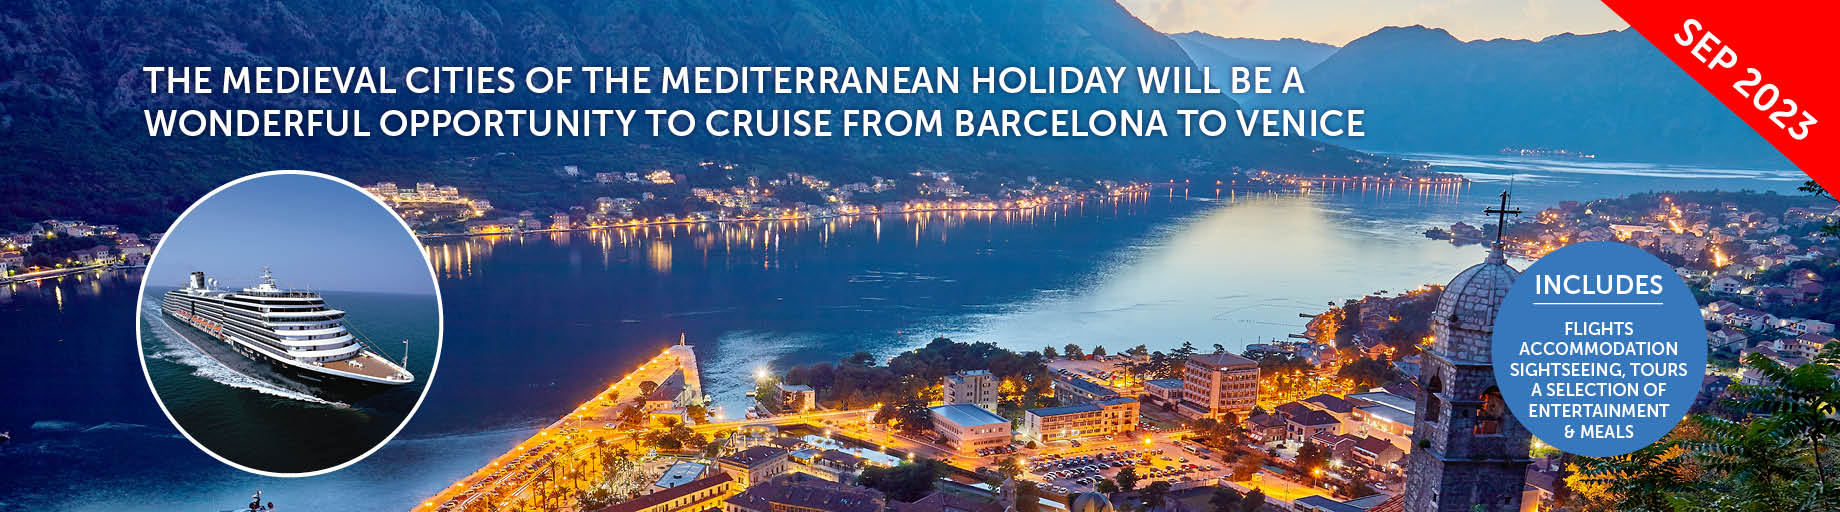 Medieval Cities of the Mediterranean Cruise